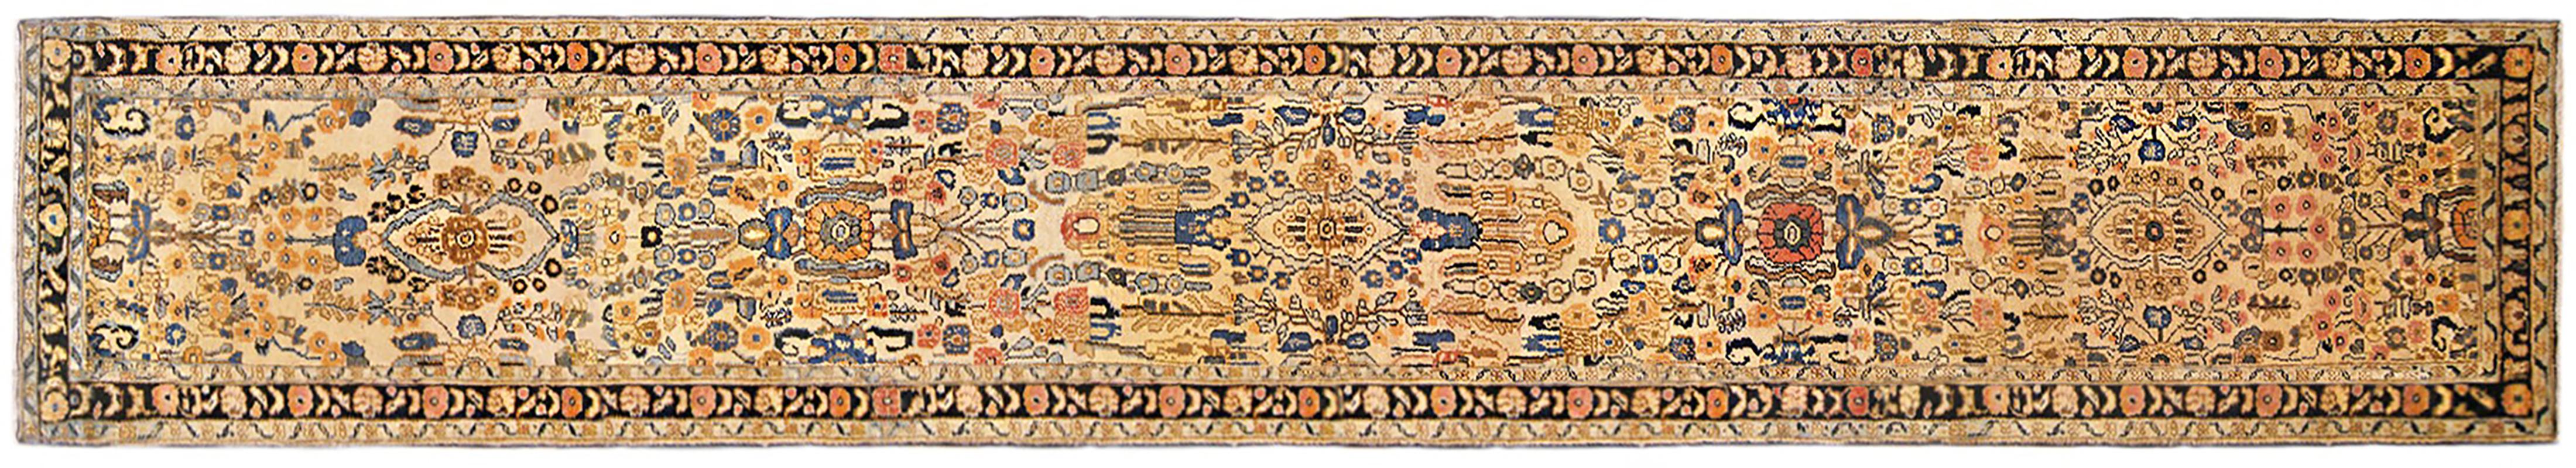 Antique Persian Hamadan Oriental Rug, in Runner size, with Soft Colors & Foliate